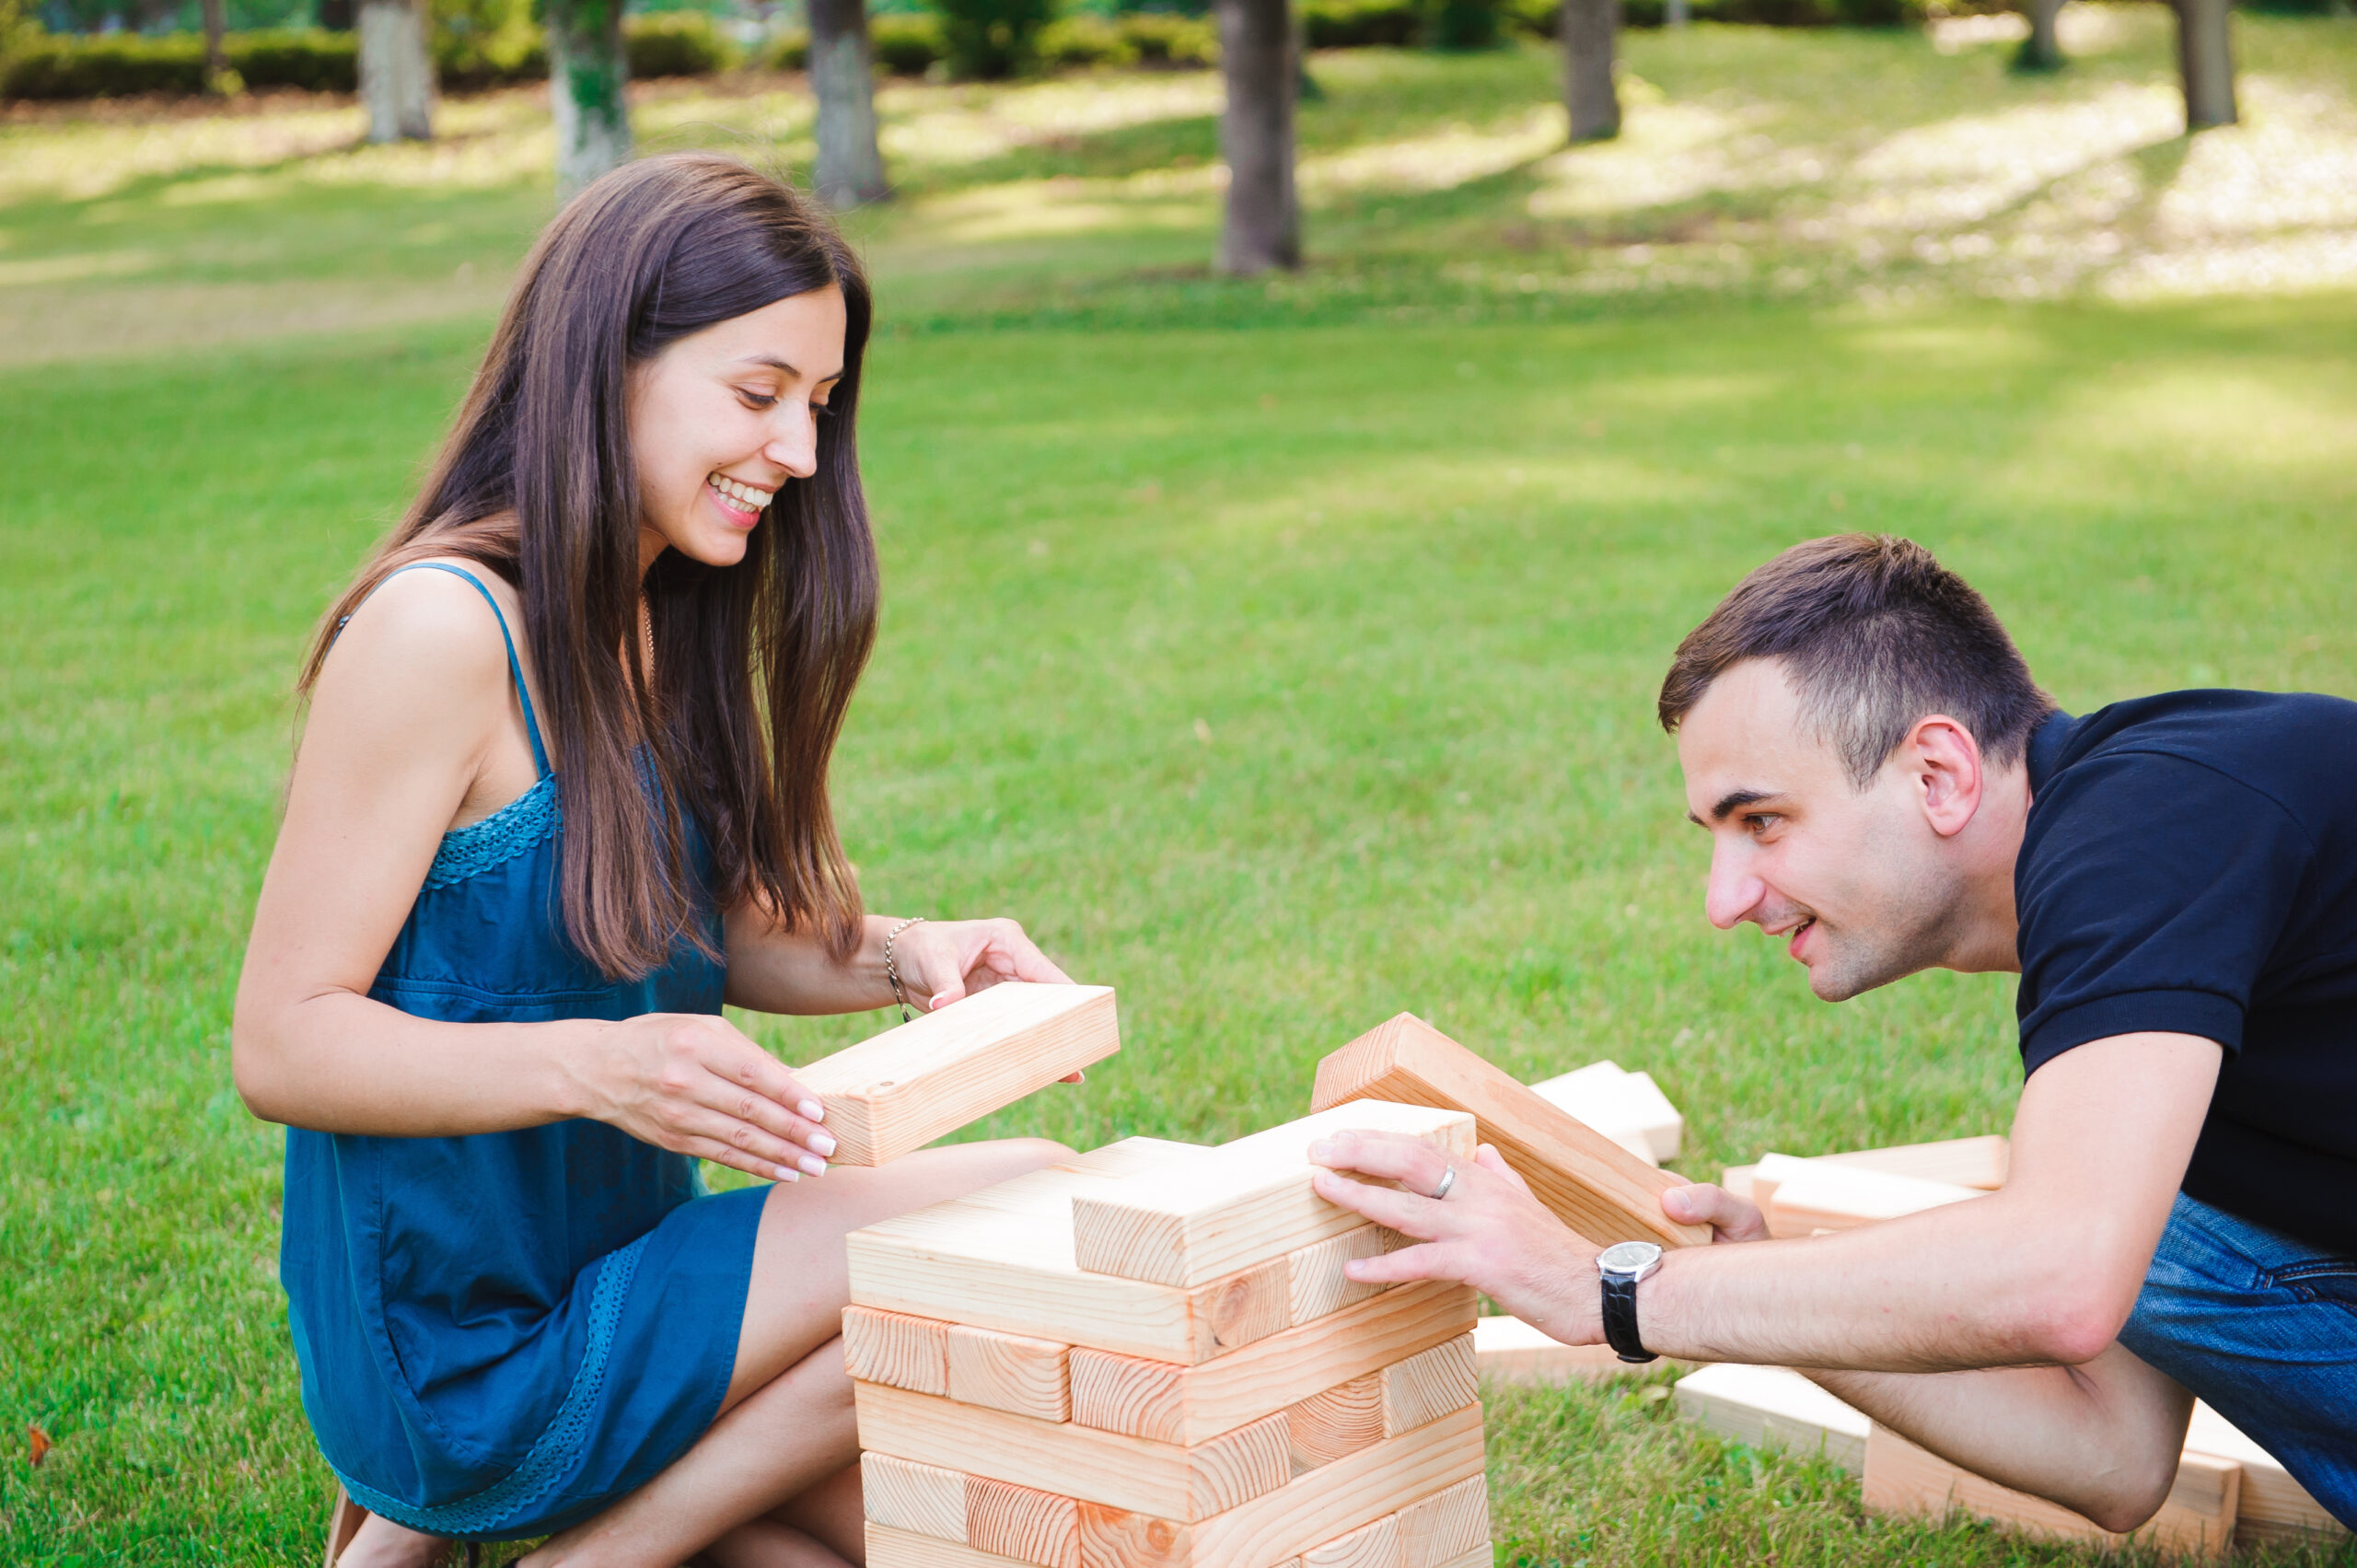 Can You Use Two Hands in Giant Garden Jenga?